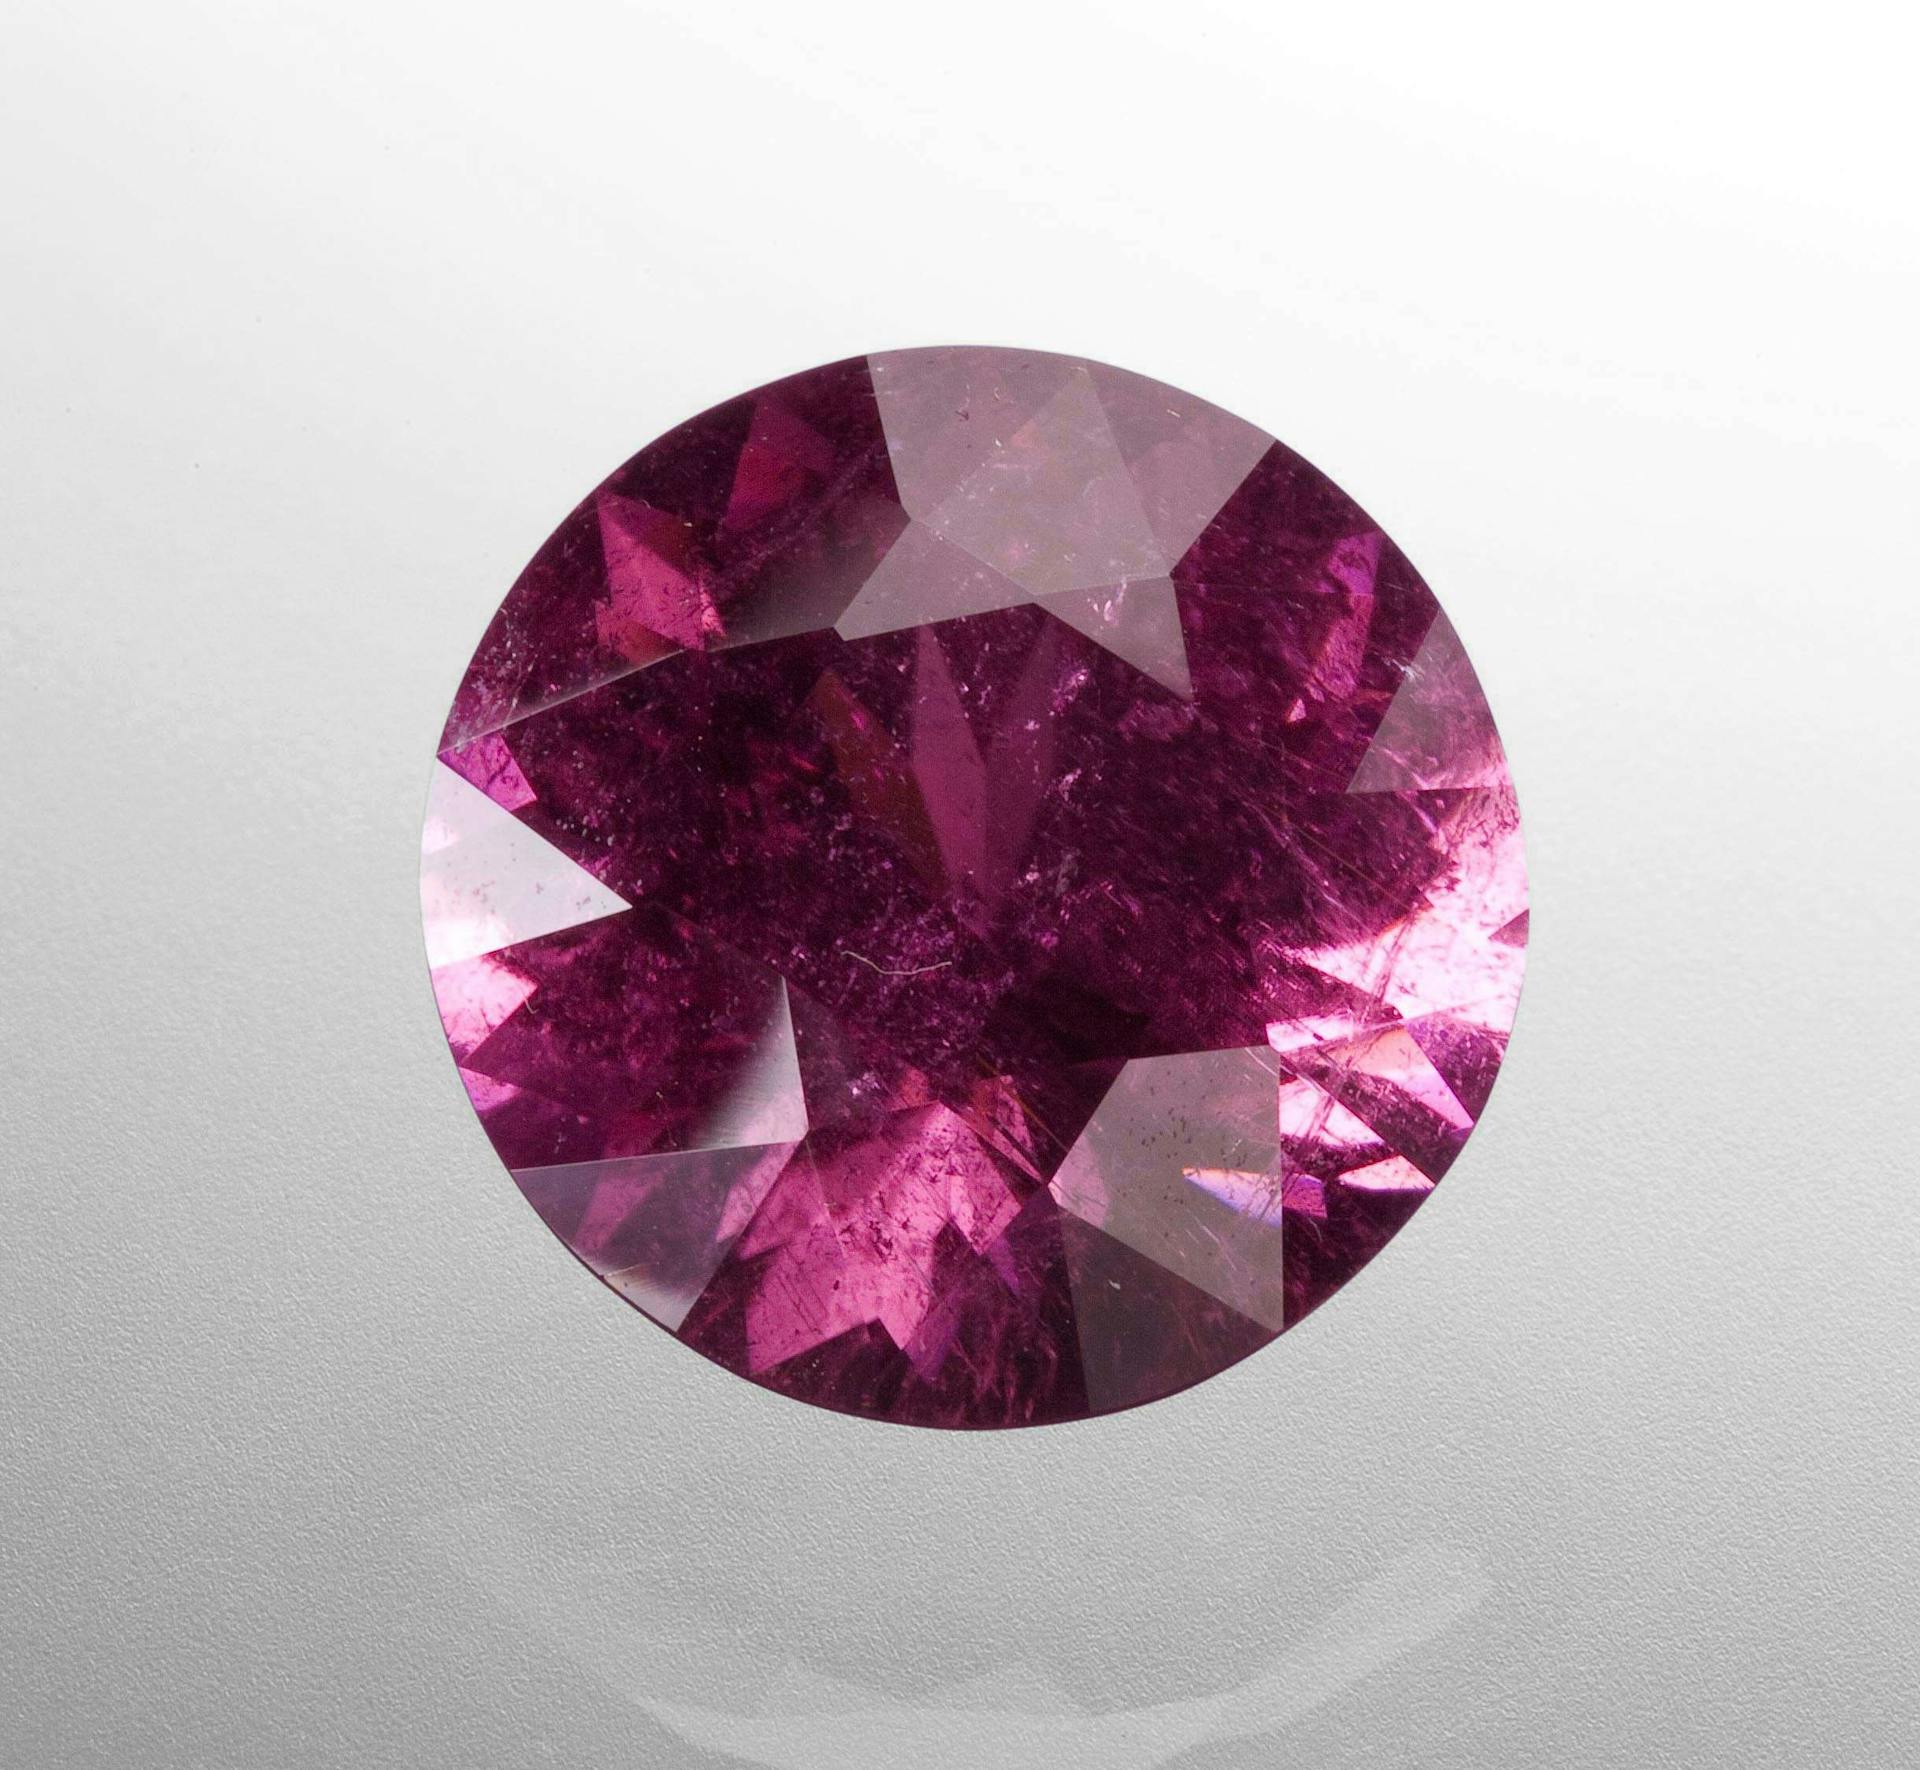 Rubellite Tourmaline Value, Price, and Jewelry Information